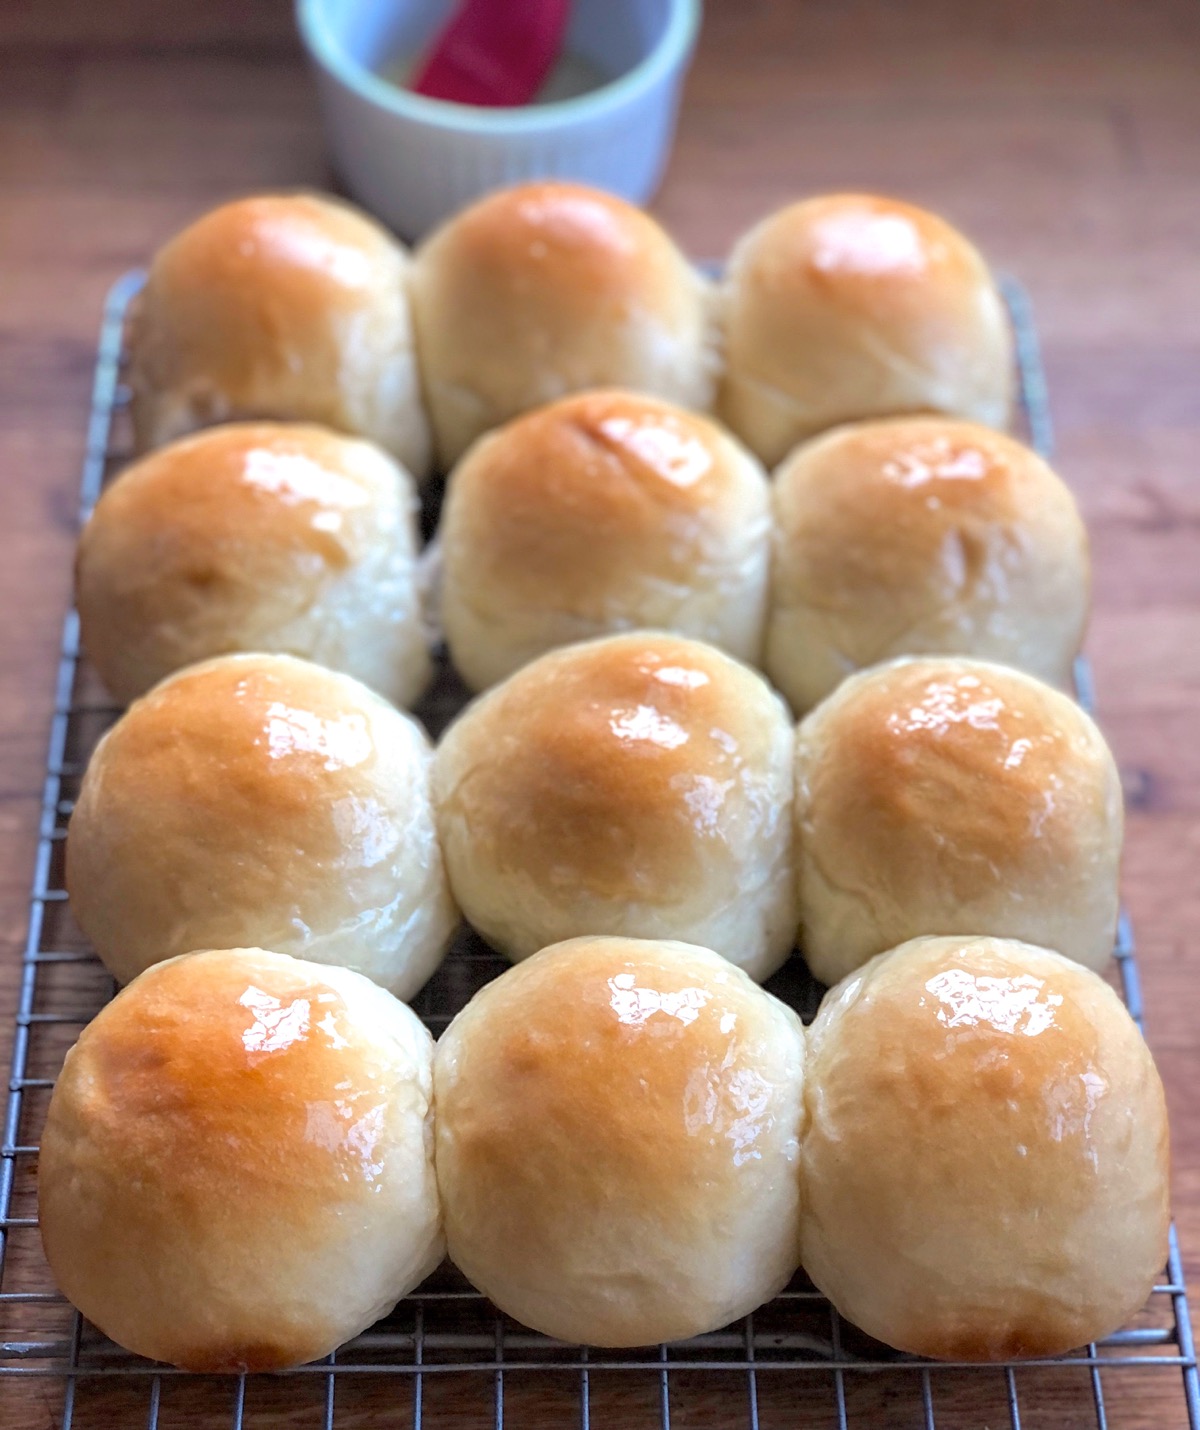 Golden pull-apart butter buns on a cooling rack, glistening from a brushing of melted butter.